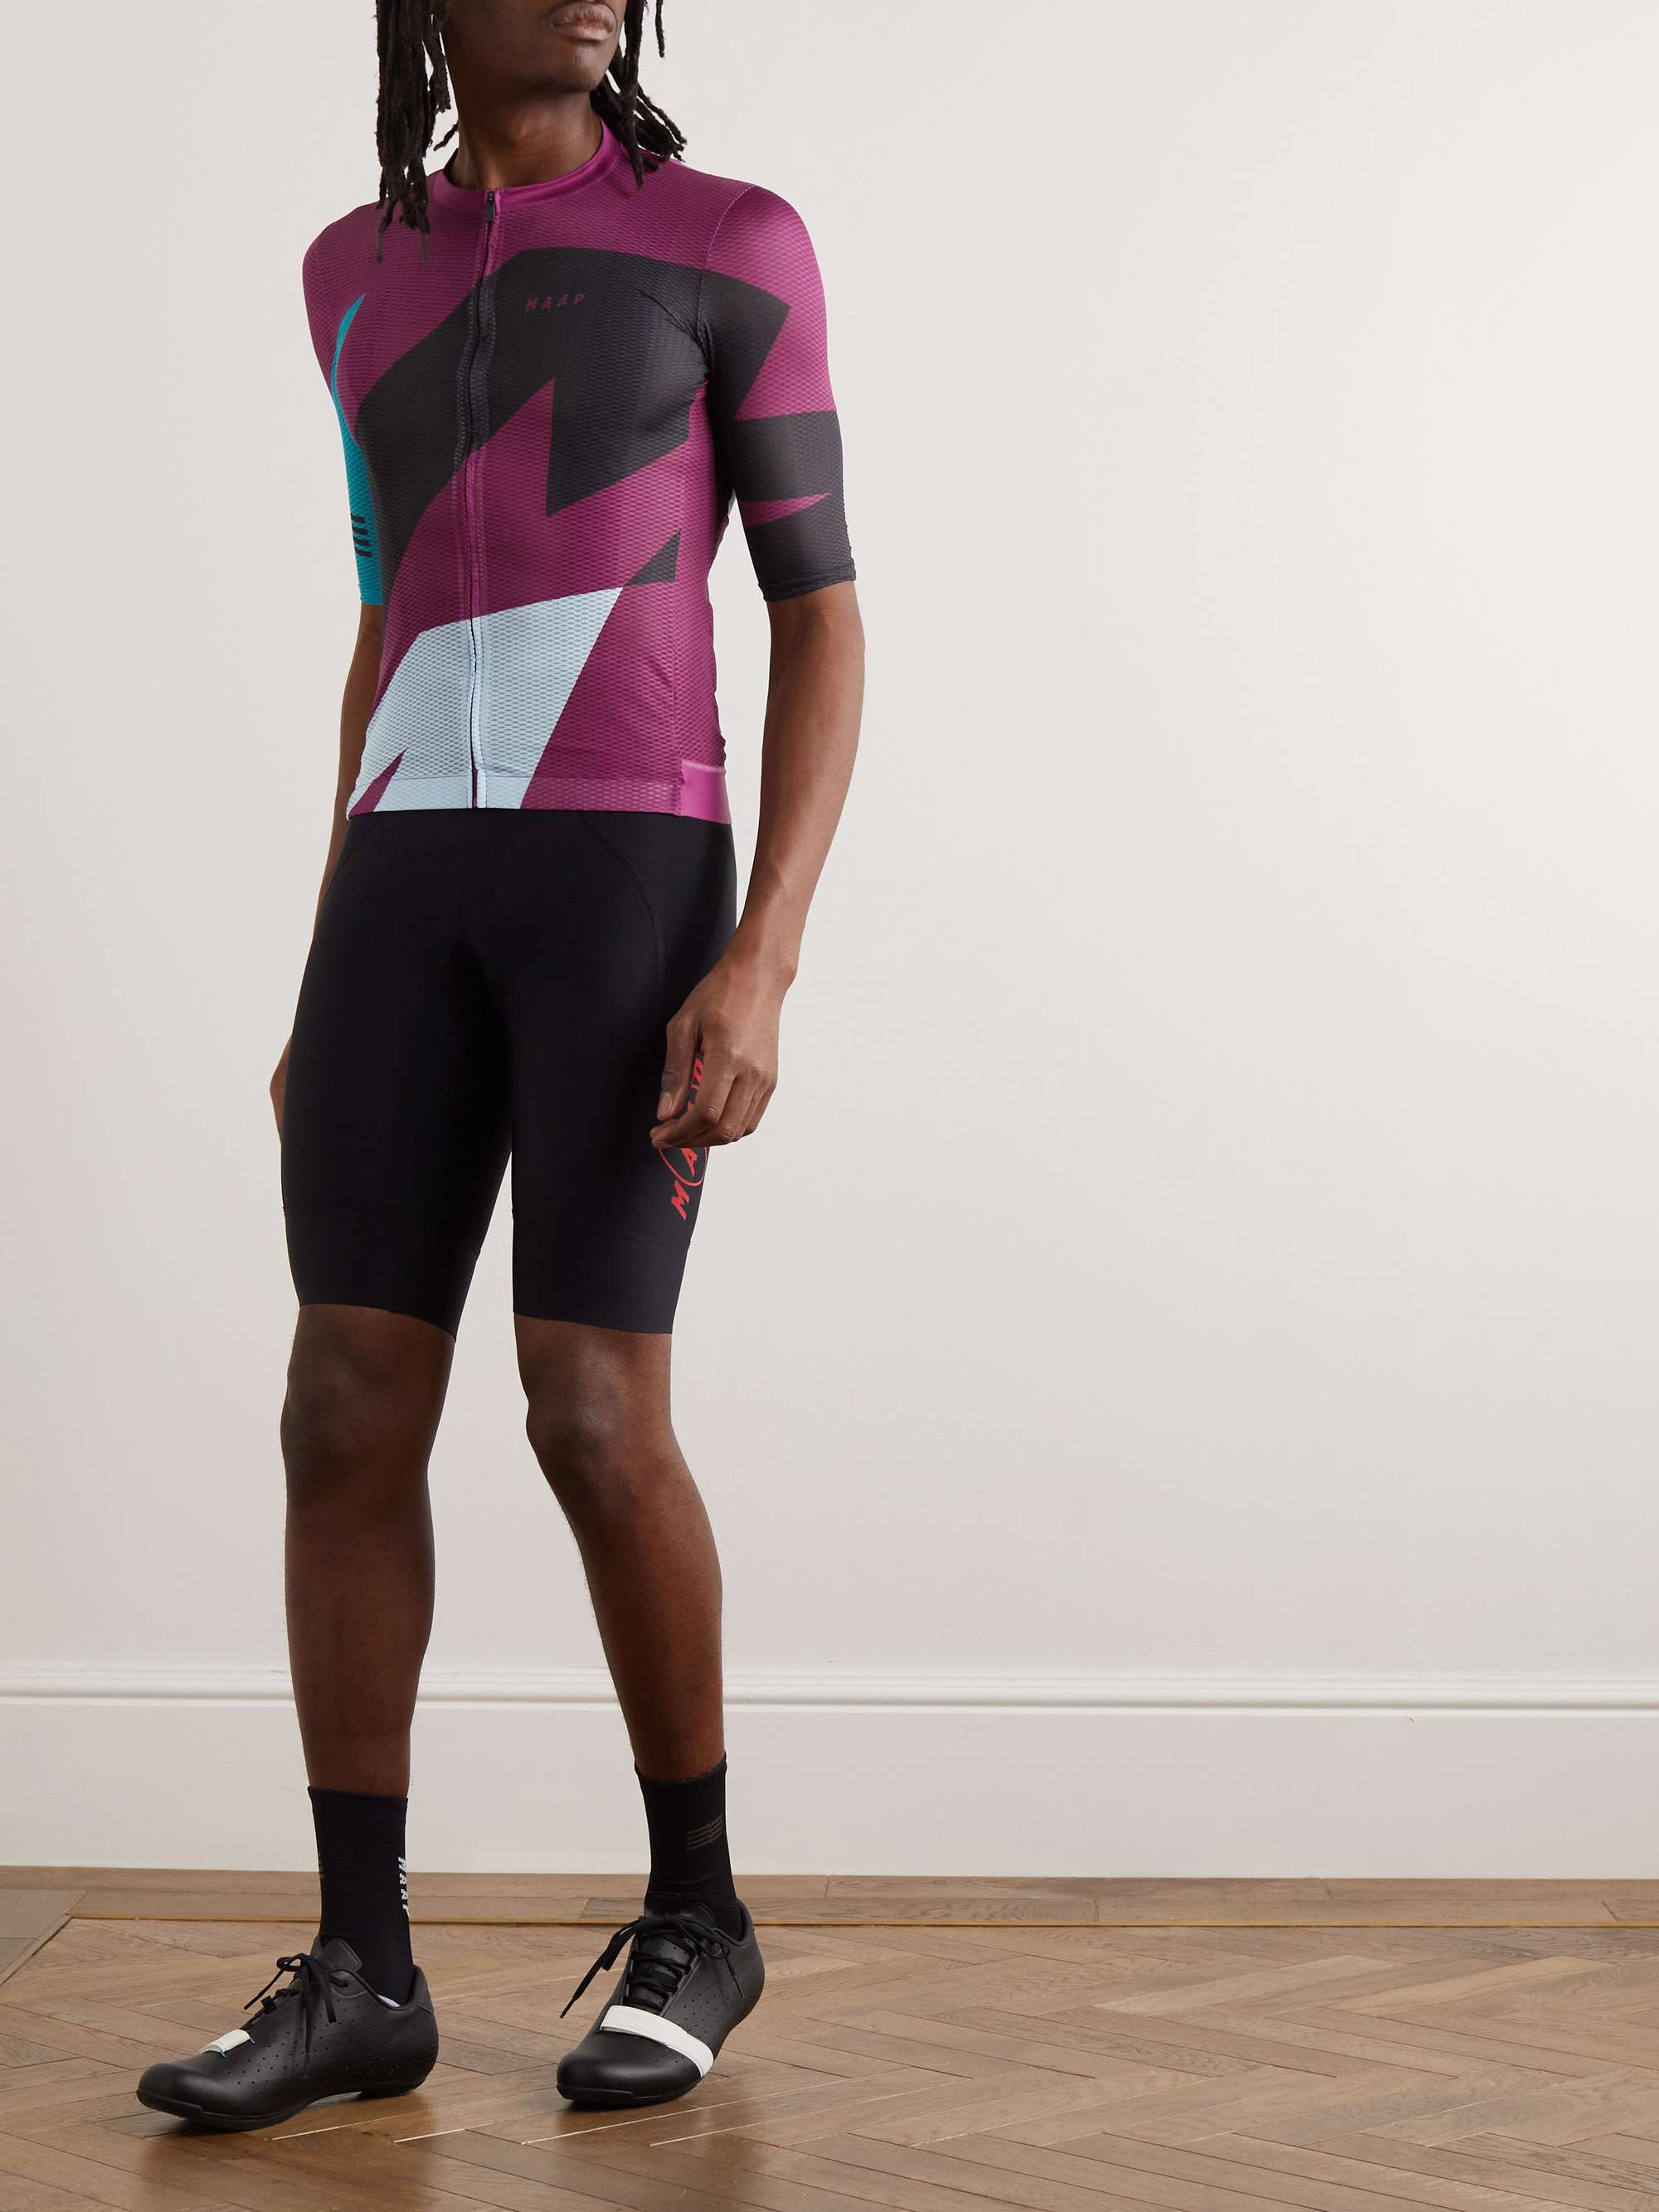 MAAP Emerge Ulralight Pro Printed Recycled Stretch-Mesh Cycling Jersey